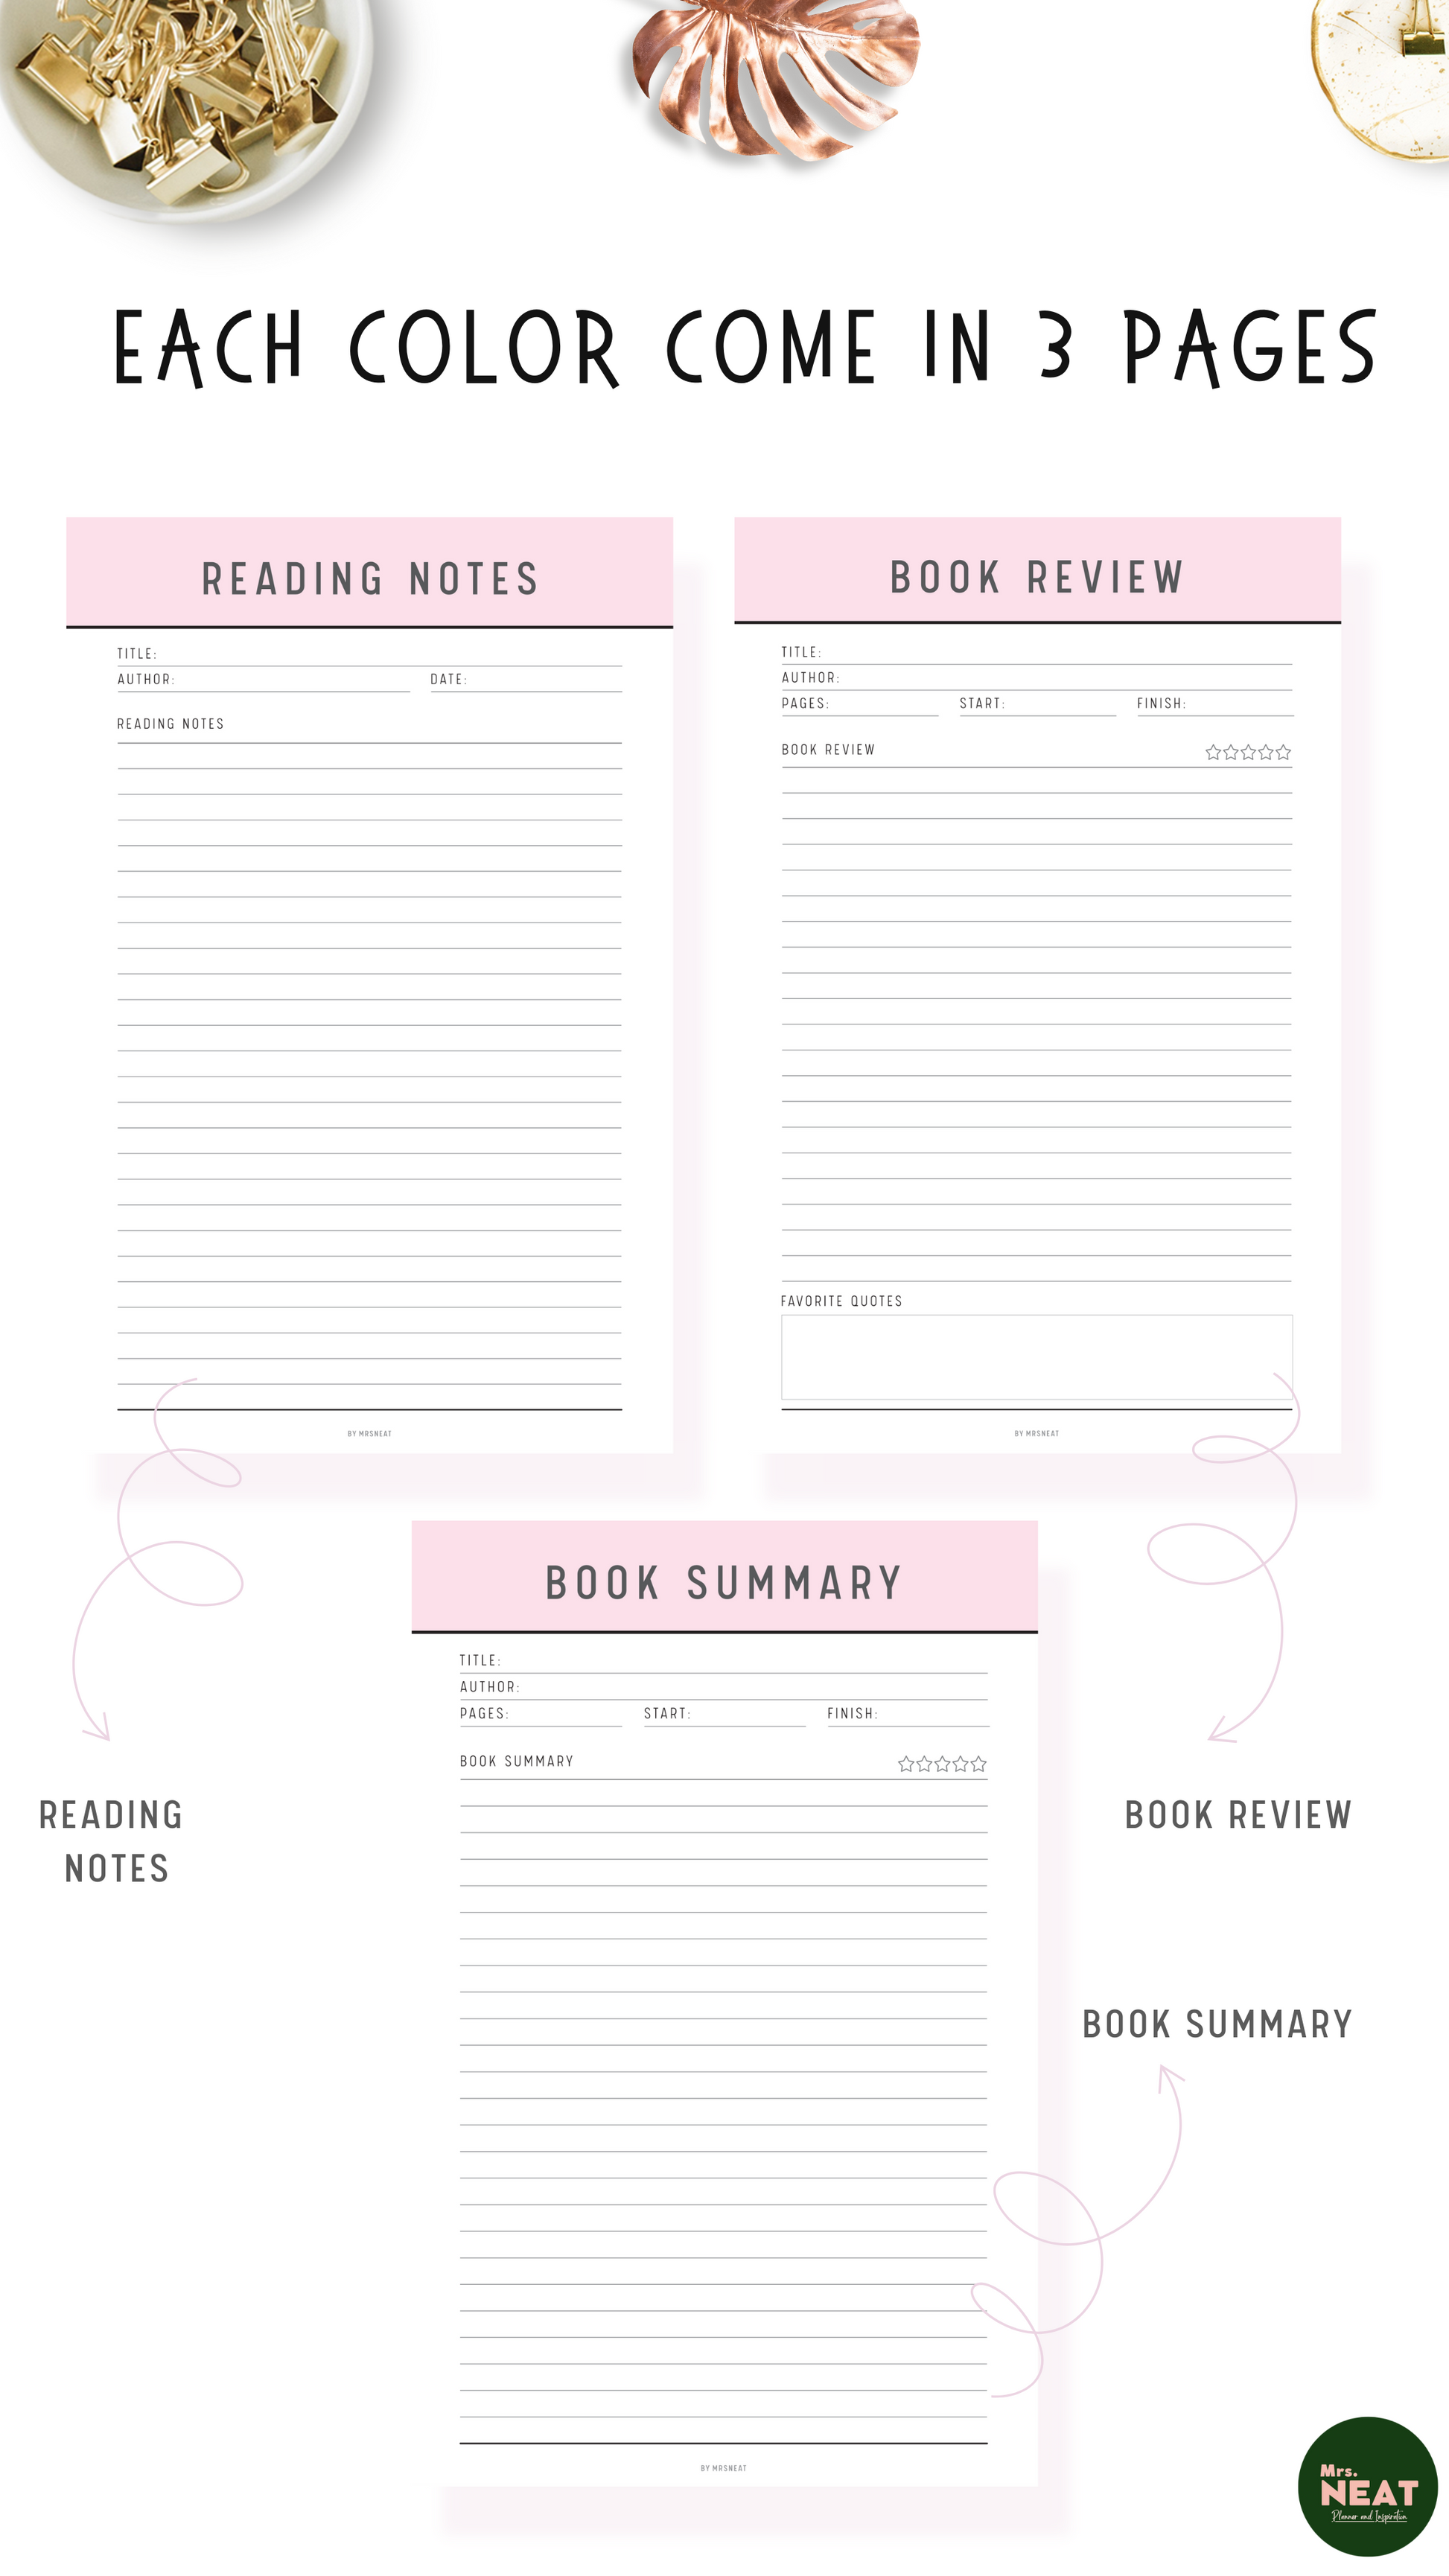 Simple Book Review Template Printable, Book Log and Review, Book Rating,  Book Lover Inserts, A4/a5/letter/half Size, Instant Download PDF -   Canada